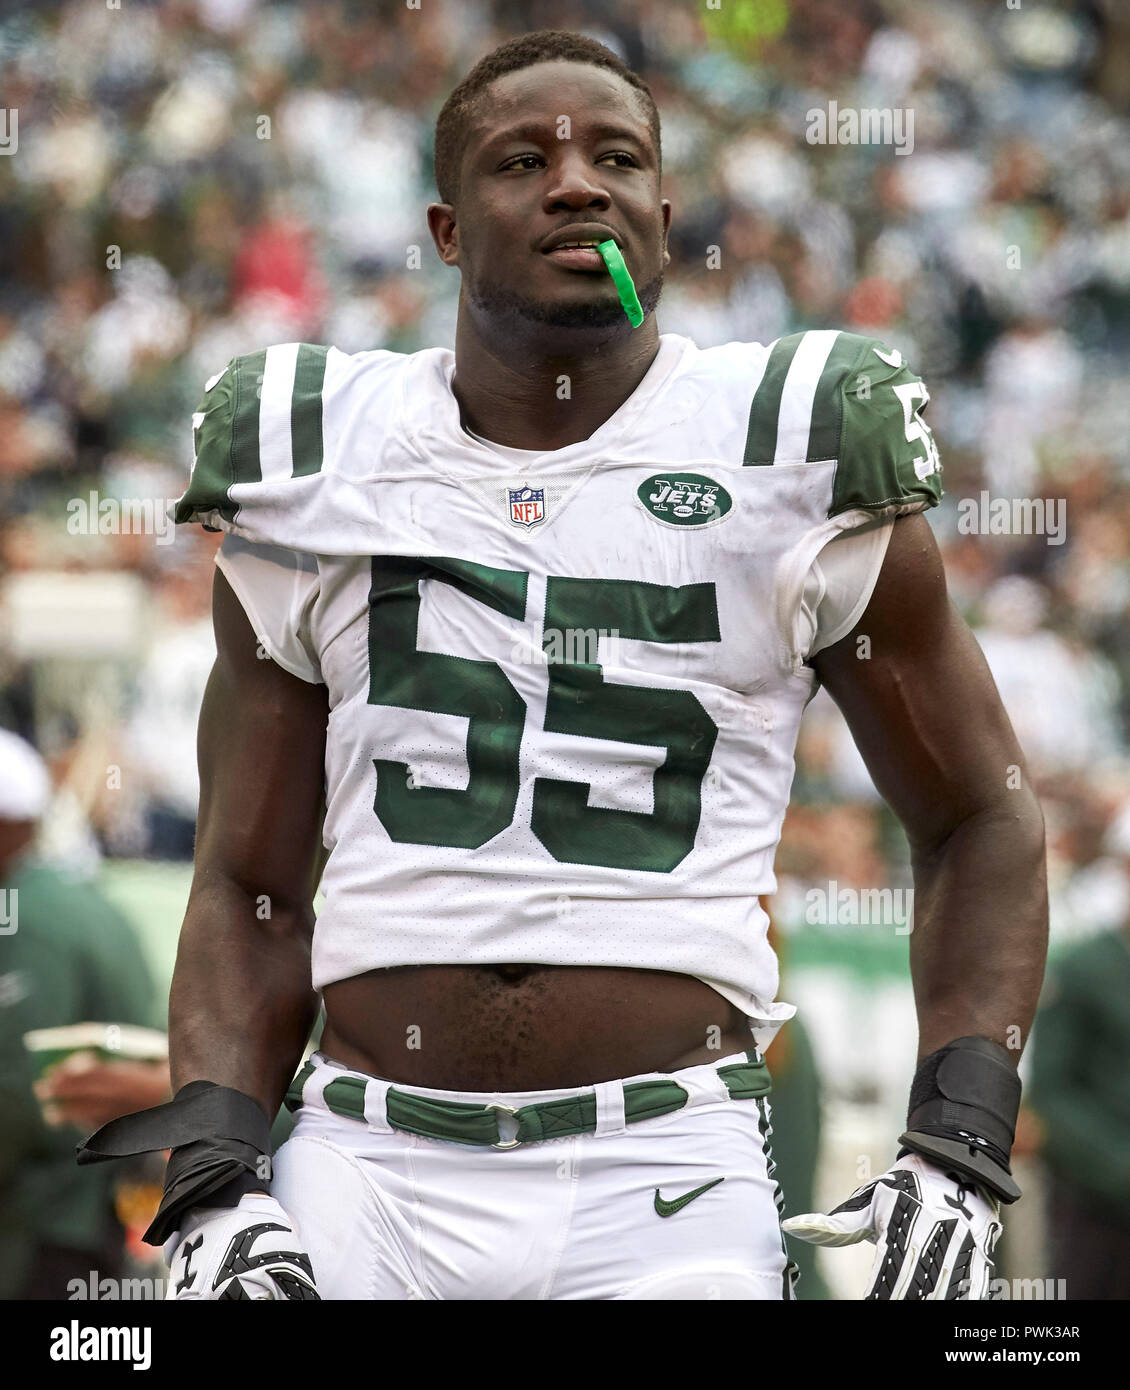 October 14, 2018 - East Rutherford, New Jersey, U.S. - New York Jets  linebacker Jeremiah Attaochu (55) on the sideline during a NFL game between  the Indianapolis Colts and the New York